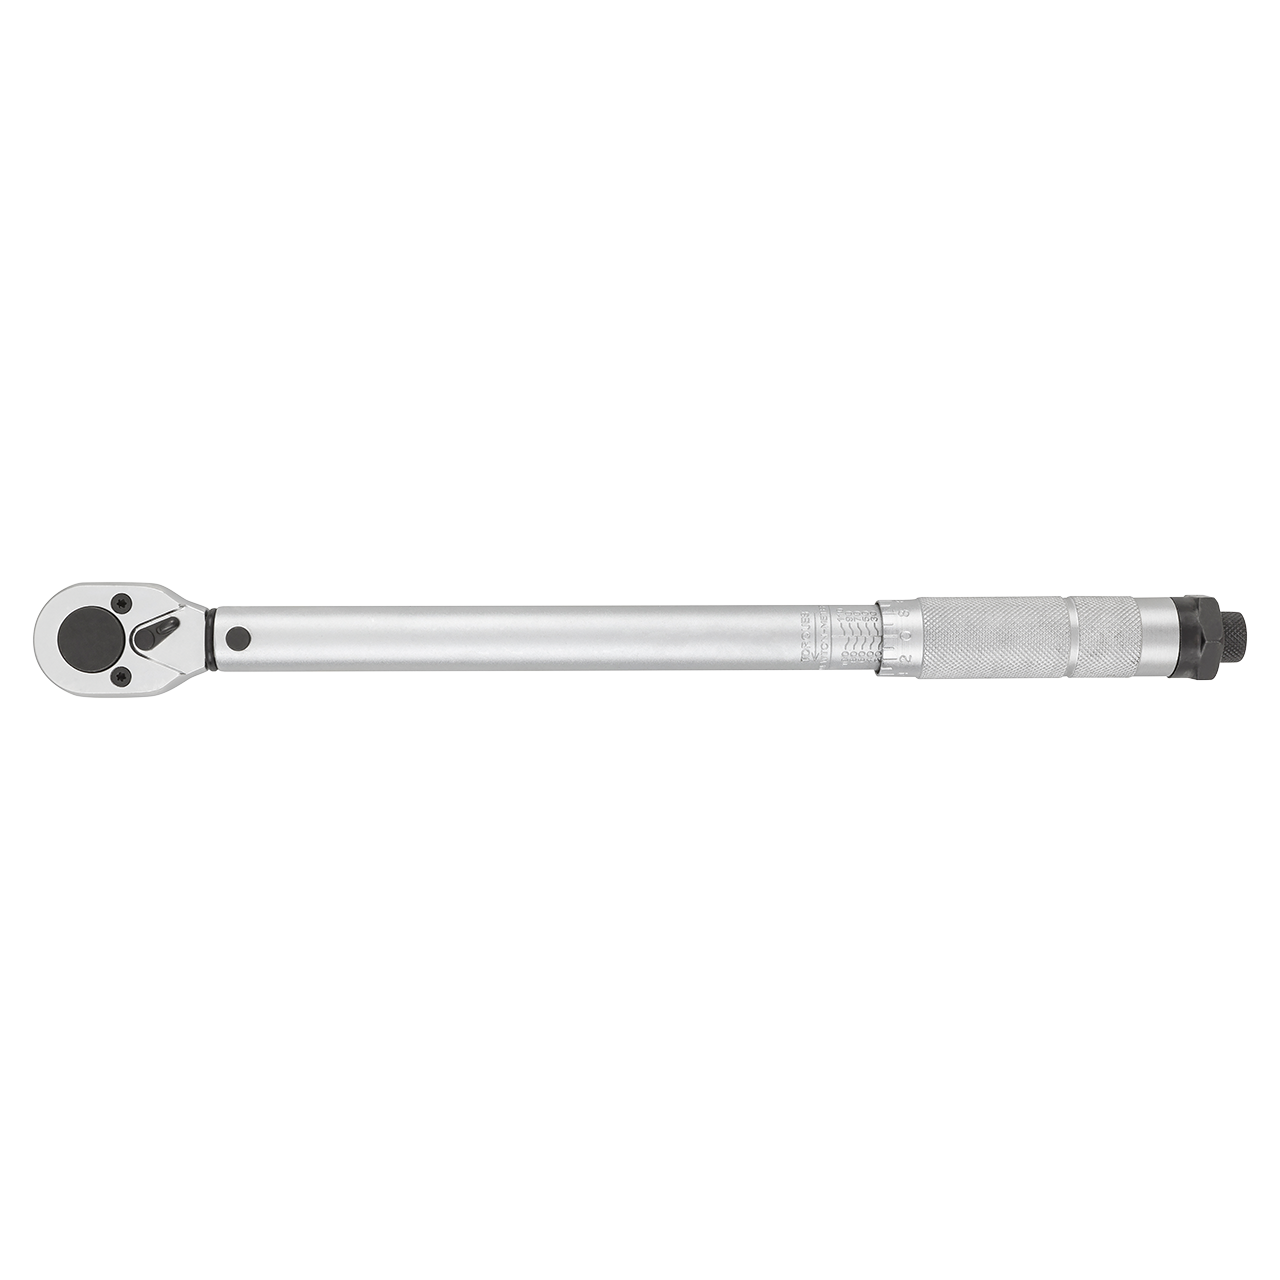 3/8" Automatic Torque Wrench